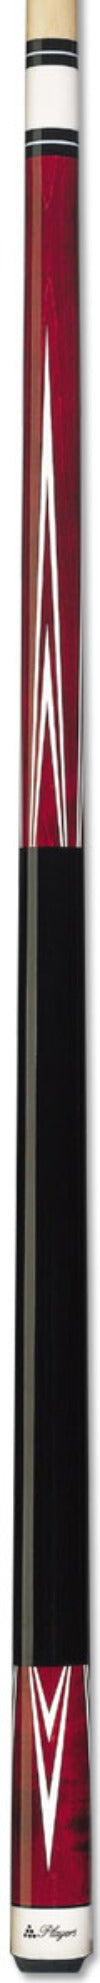 Players Players C-801 Pool Cue Pool Cue